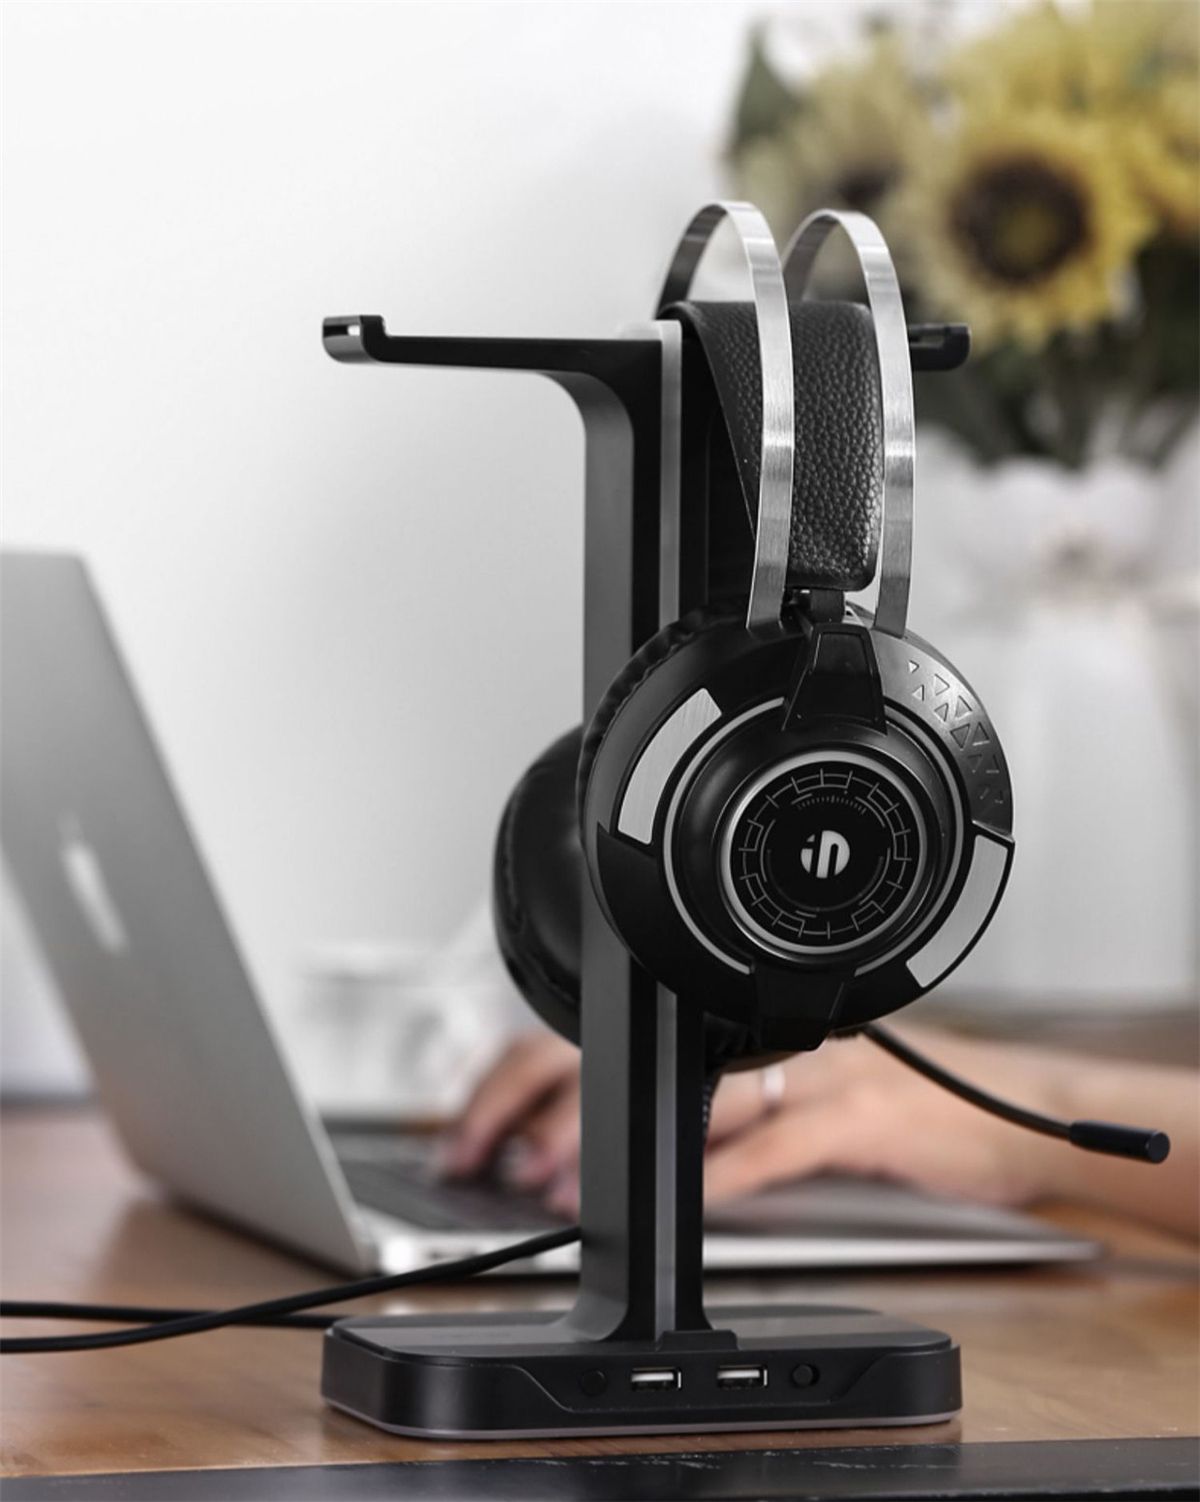 Inphic-H100-Headset-Stand-Dual-USB-Ports-Colorful-Light-Base-Headphone-Hanger-Headset-Mount-Holder-O-1742022